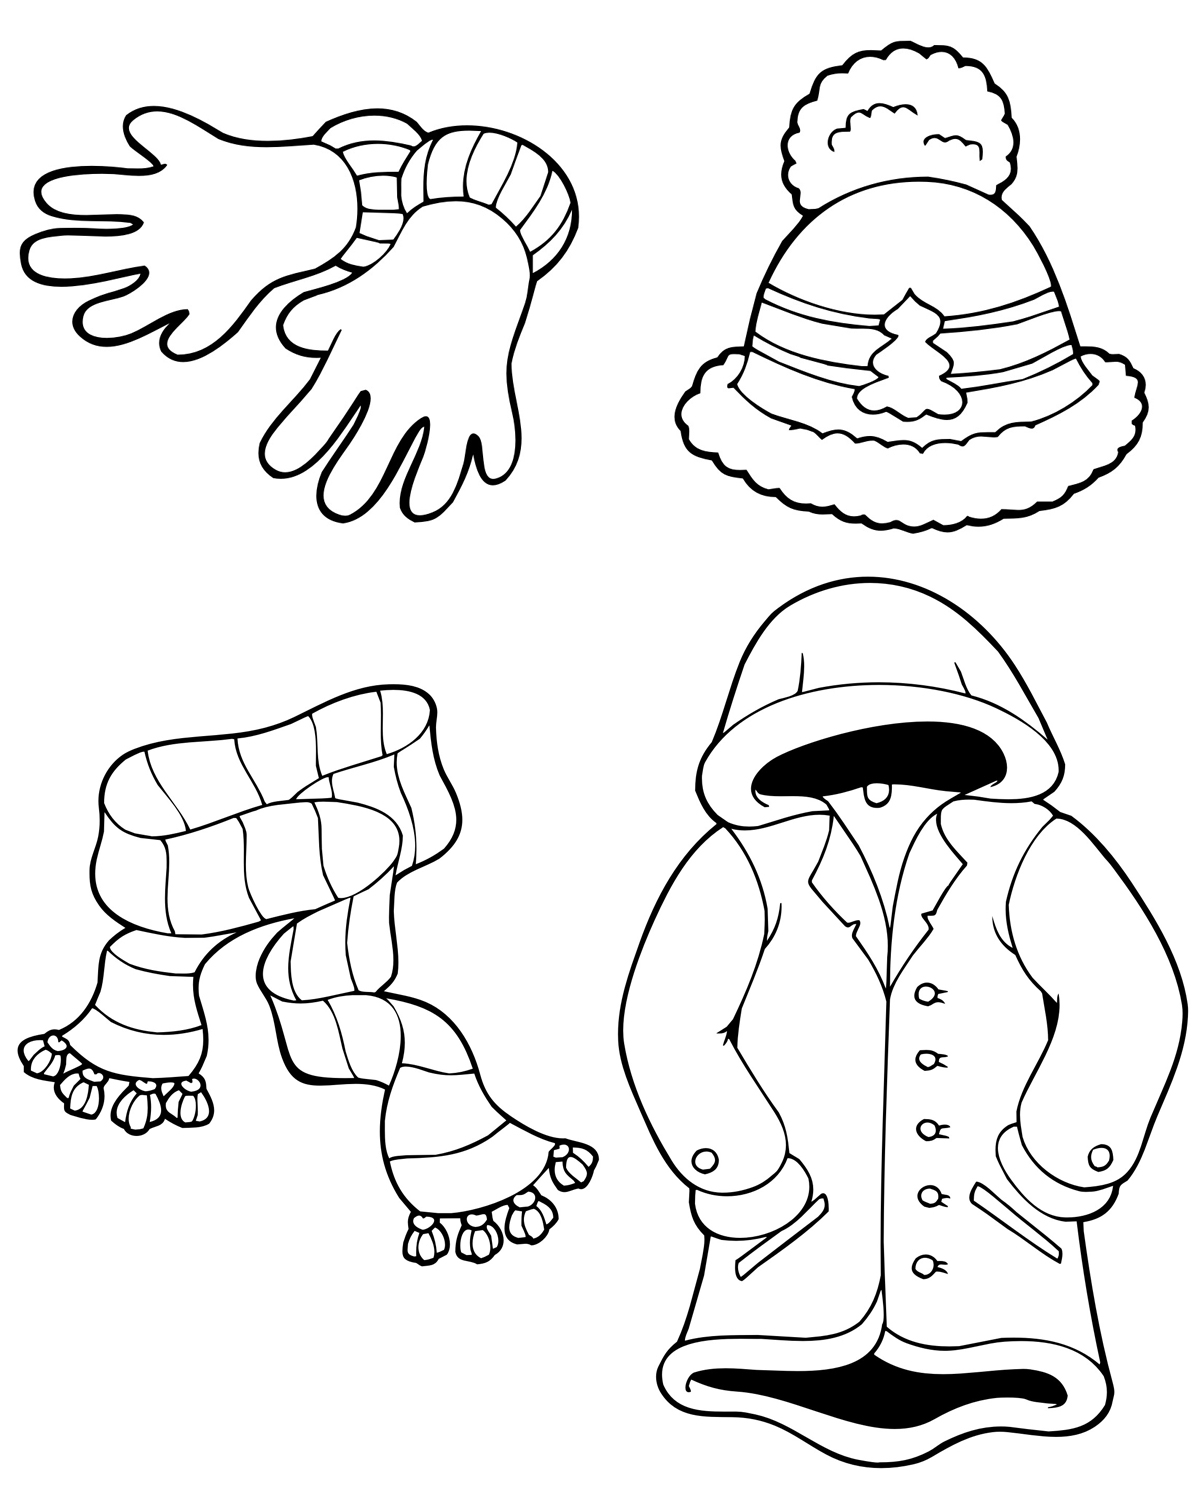 Fancy winter clothes coloring pages for kids